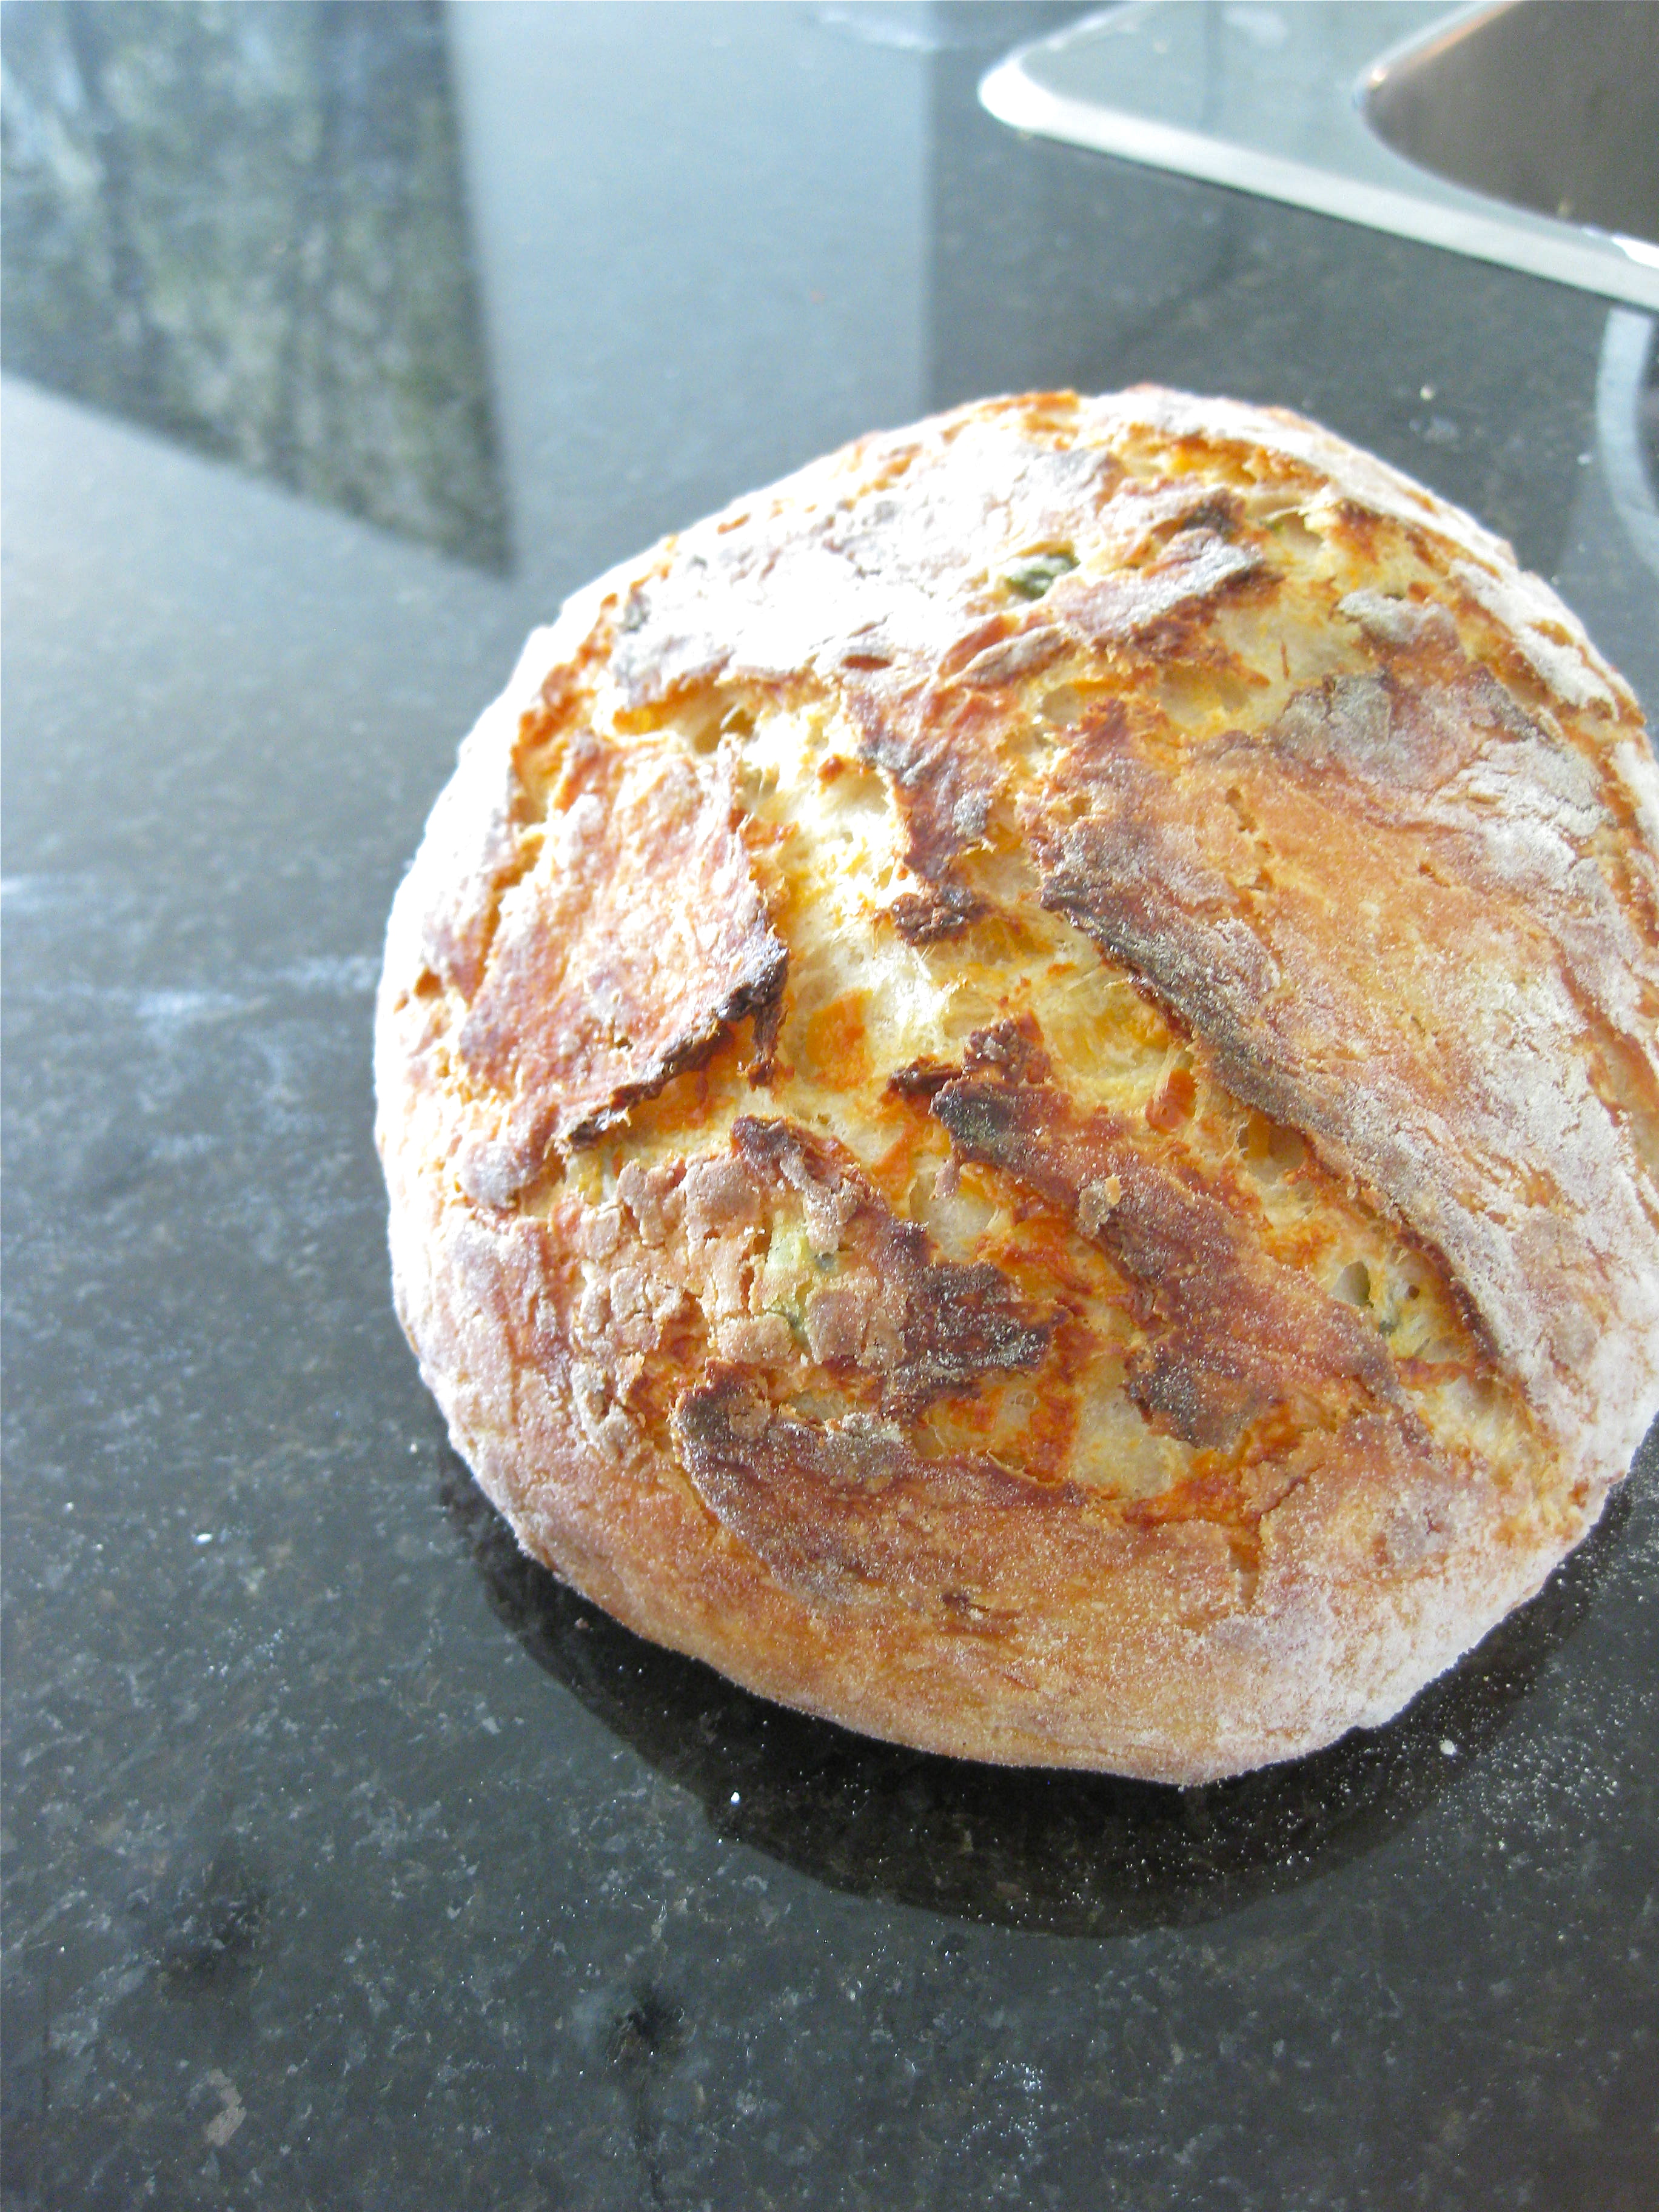 Super Amazing Easiest Bread Recipe Ever Making Things Is Awesome